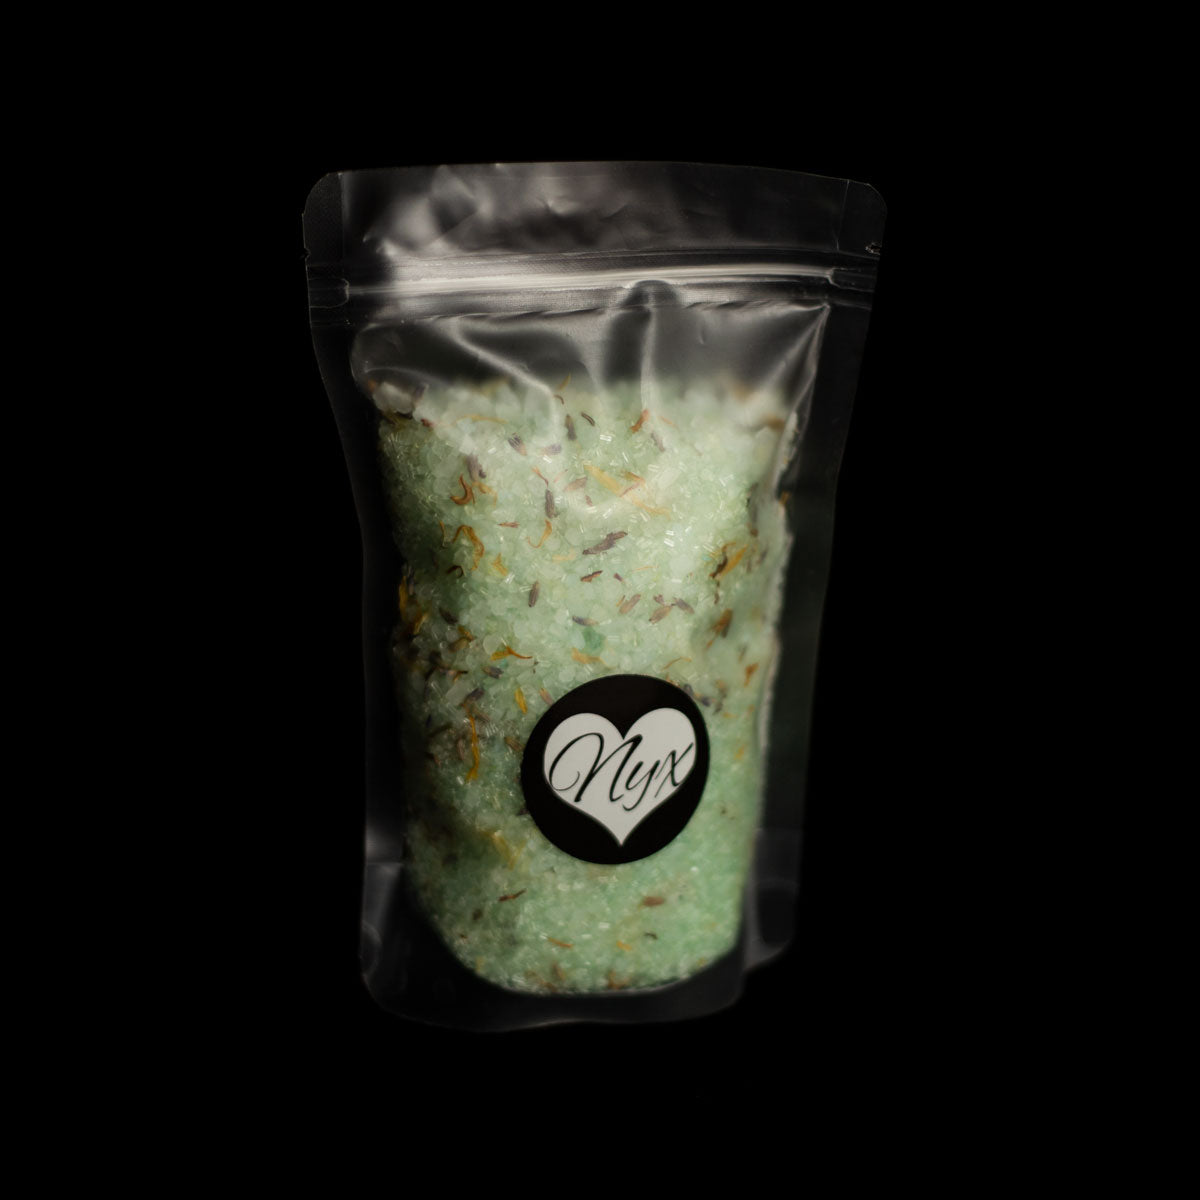 A clear/frosted bag filled with green bath salts with botanicals